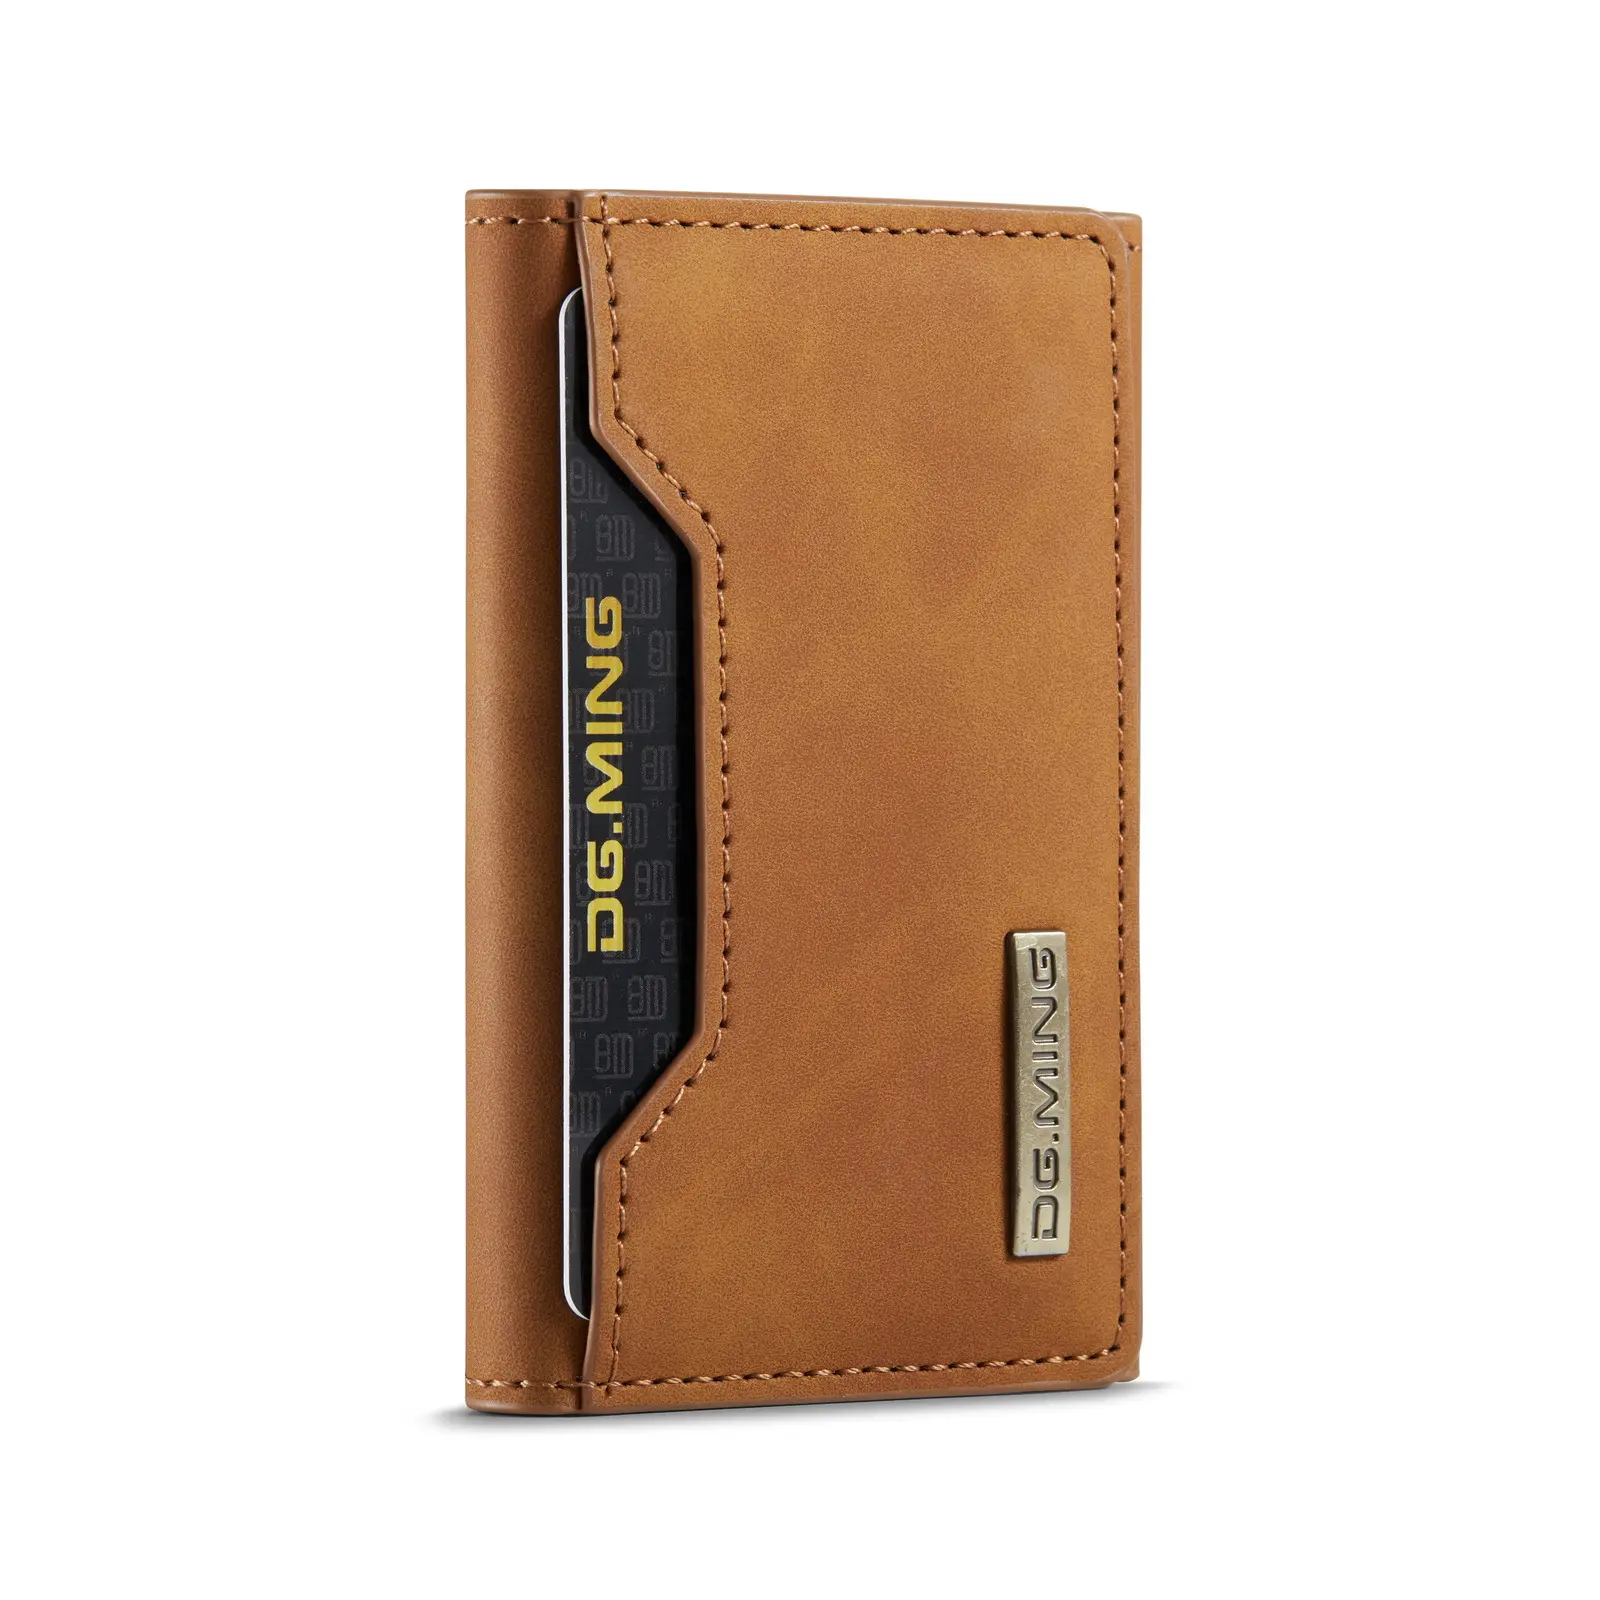 New Arrival Soft Leather Wallet Rfid Blocking Id Card Holder Multifunctional Money Bag Card Case Cards Wallets